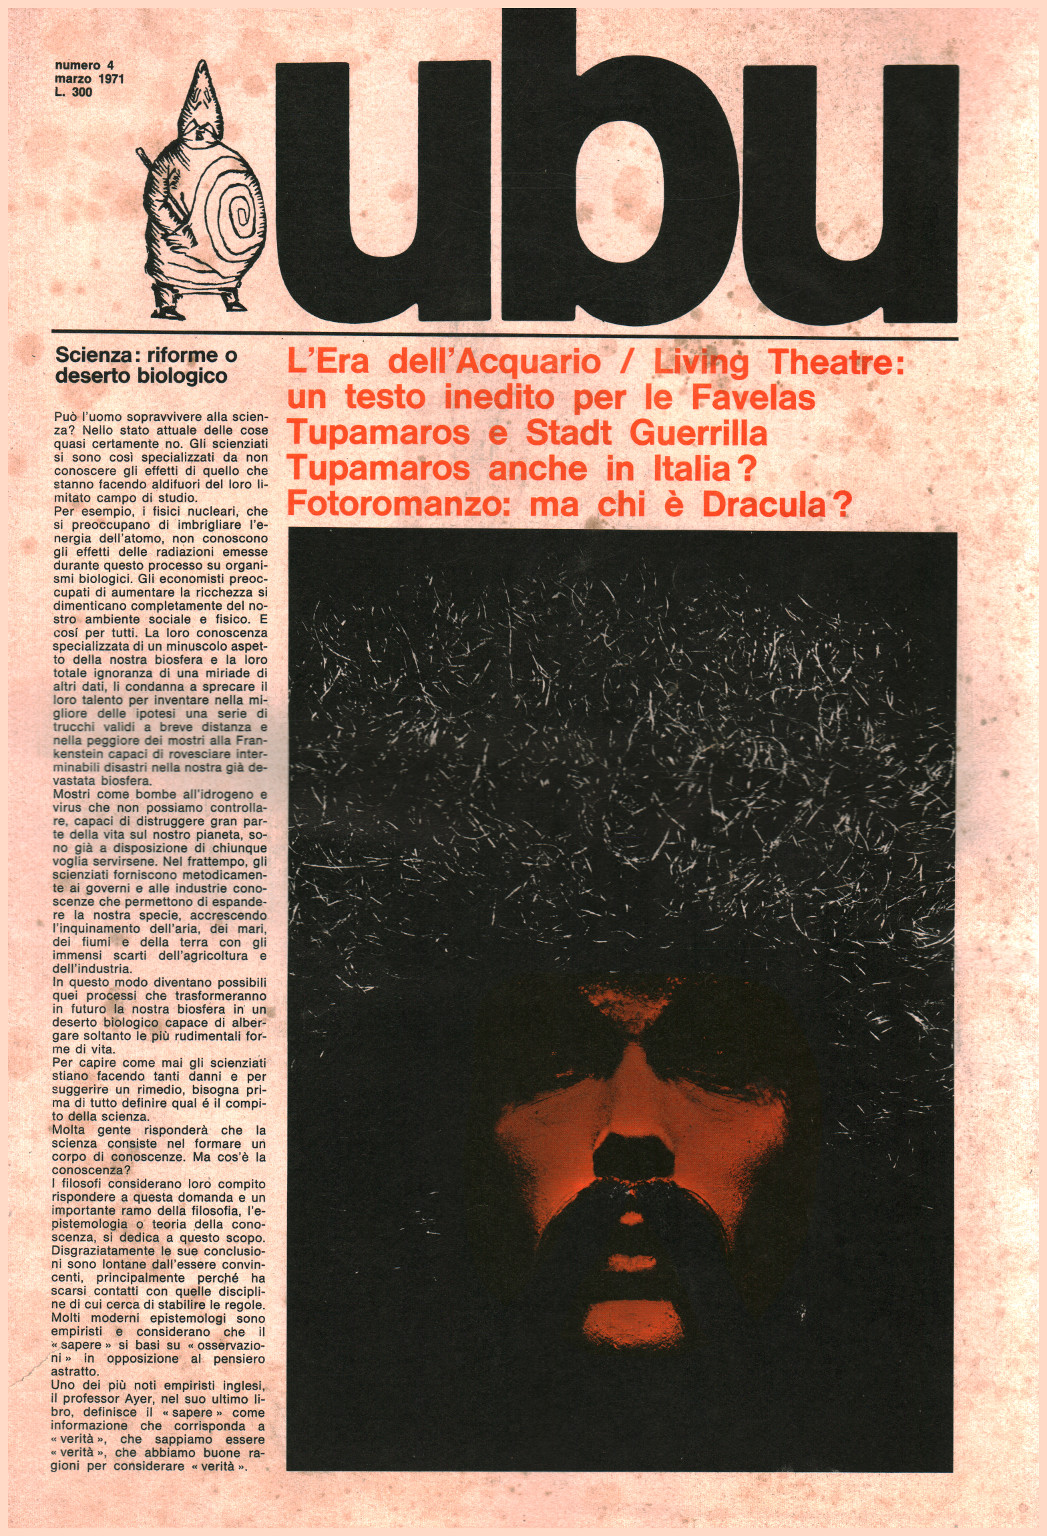 Ubu number 4 march 1971, s.a.